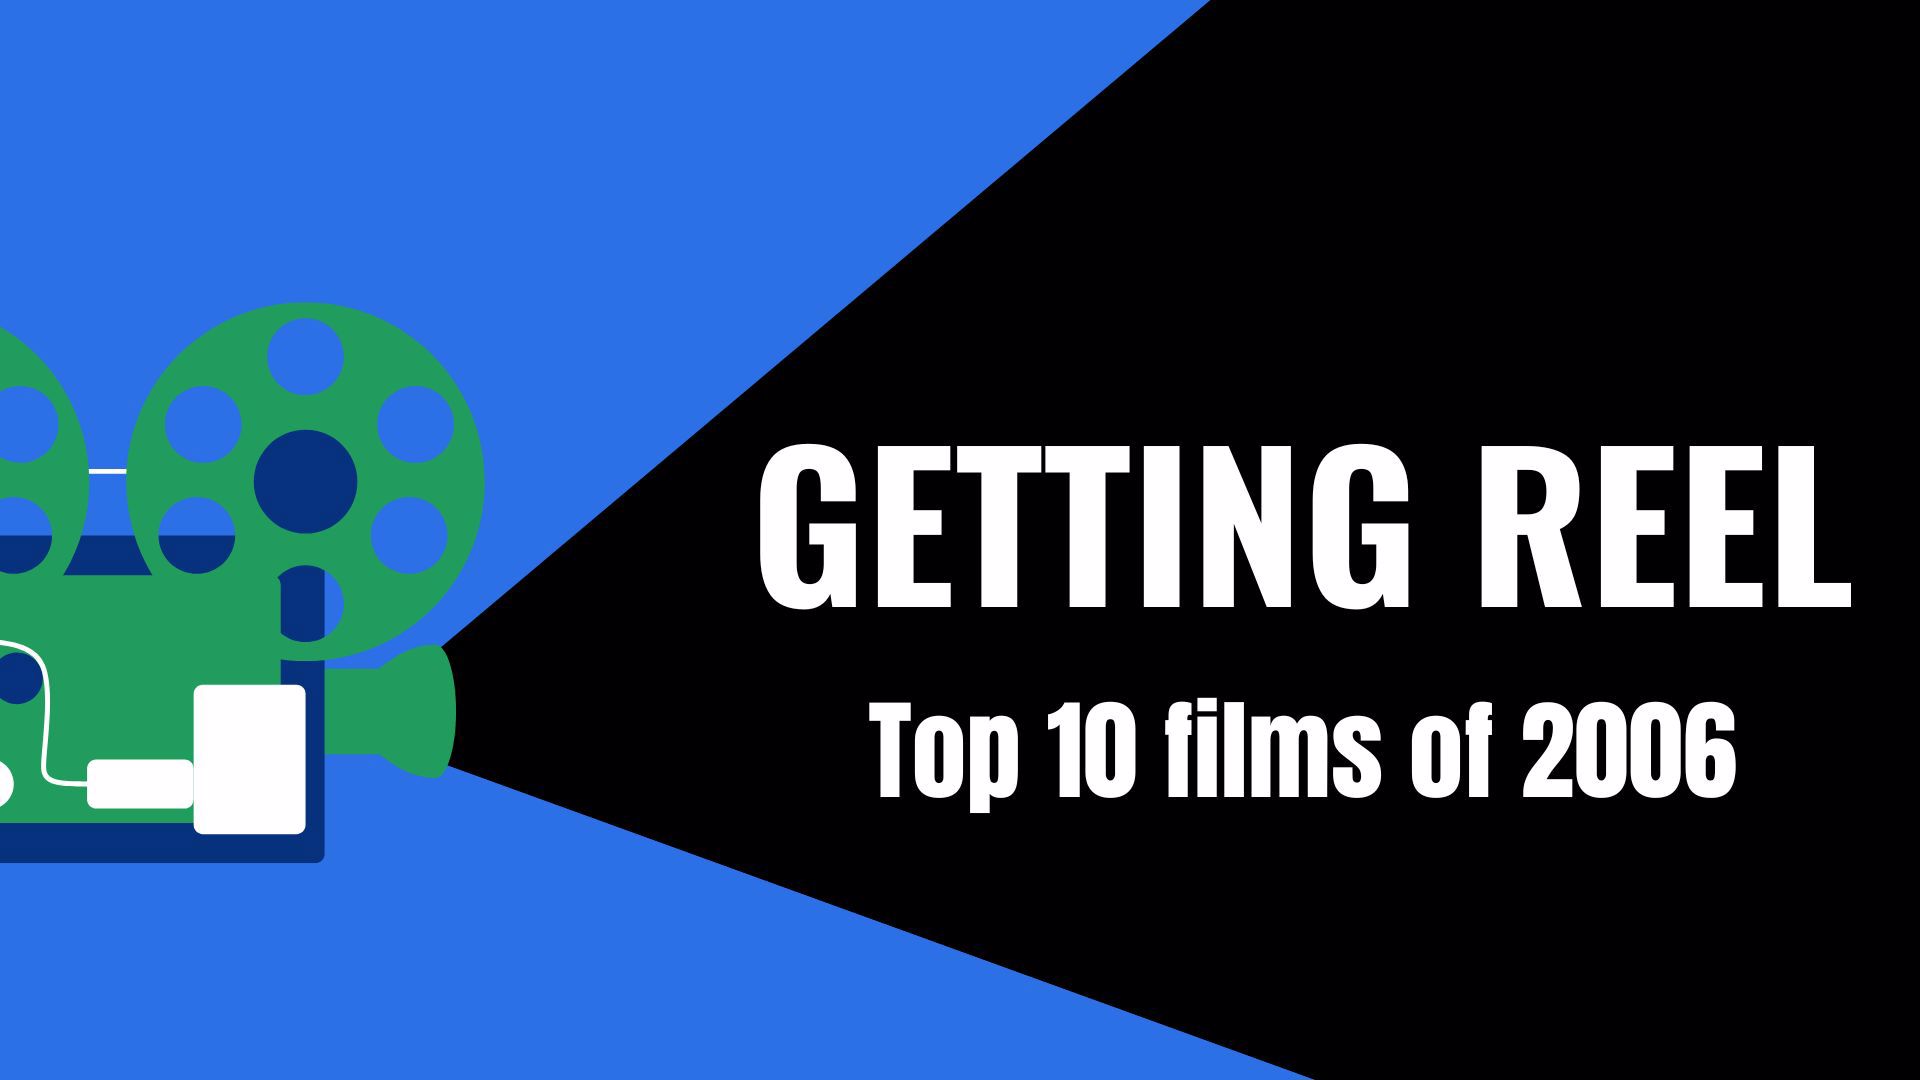 KTHV movie reviewers look at the top 10 films of 2006, which they say is one of the best years for movies. Hear their favorite picks and honorable mentions.